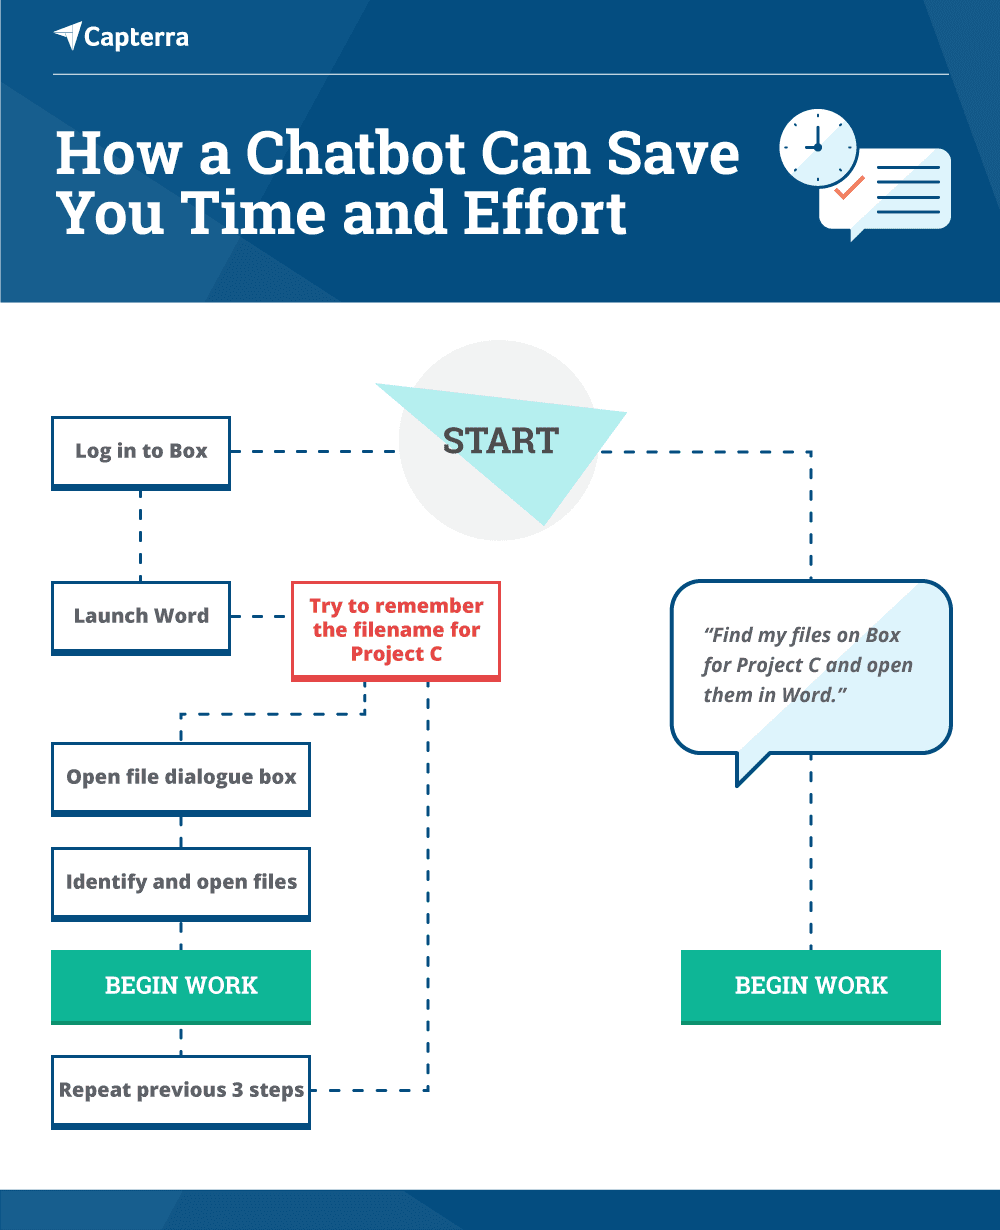 Capterra-How-a-Chatbot-Can-Save-You-Time-and-Effort-INFOGRAPHIC